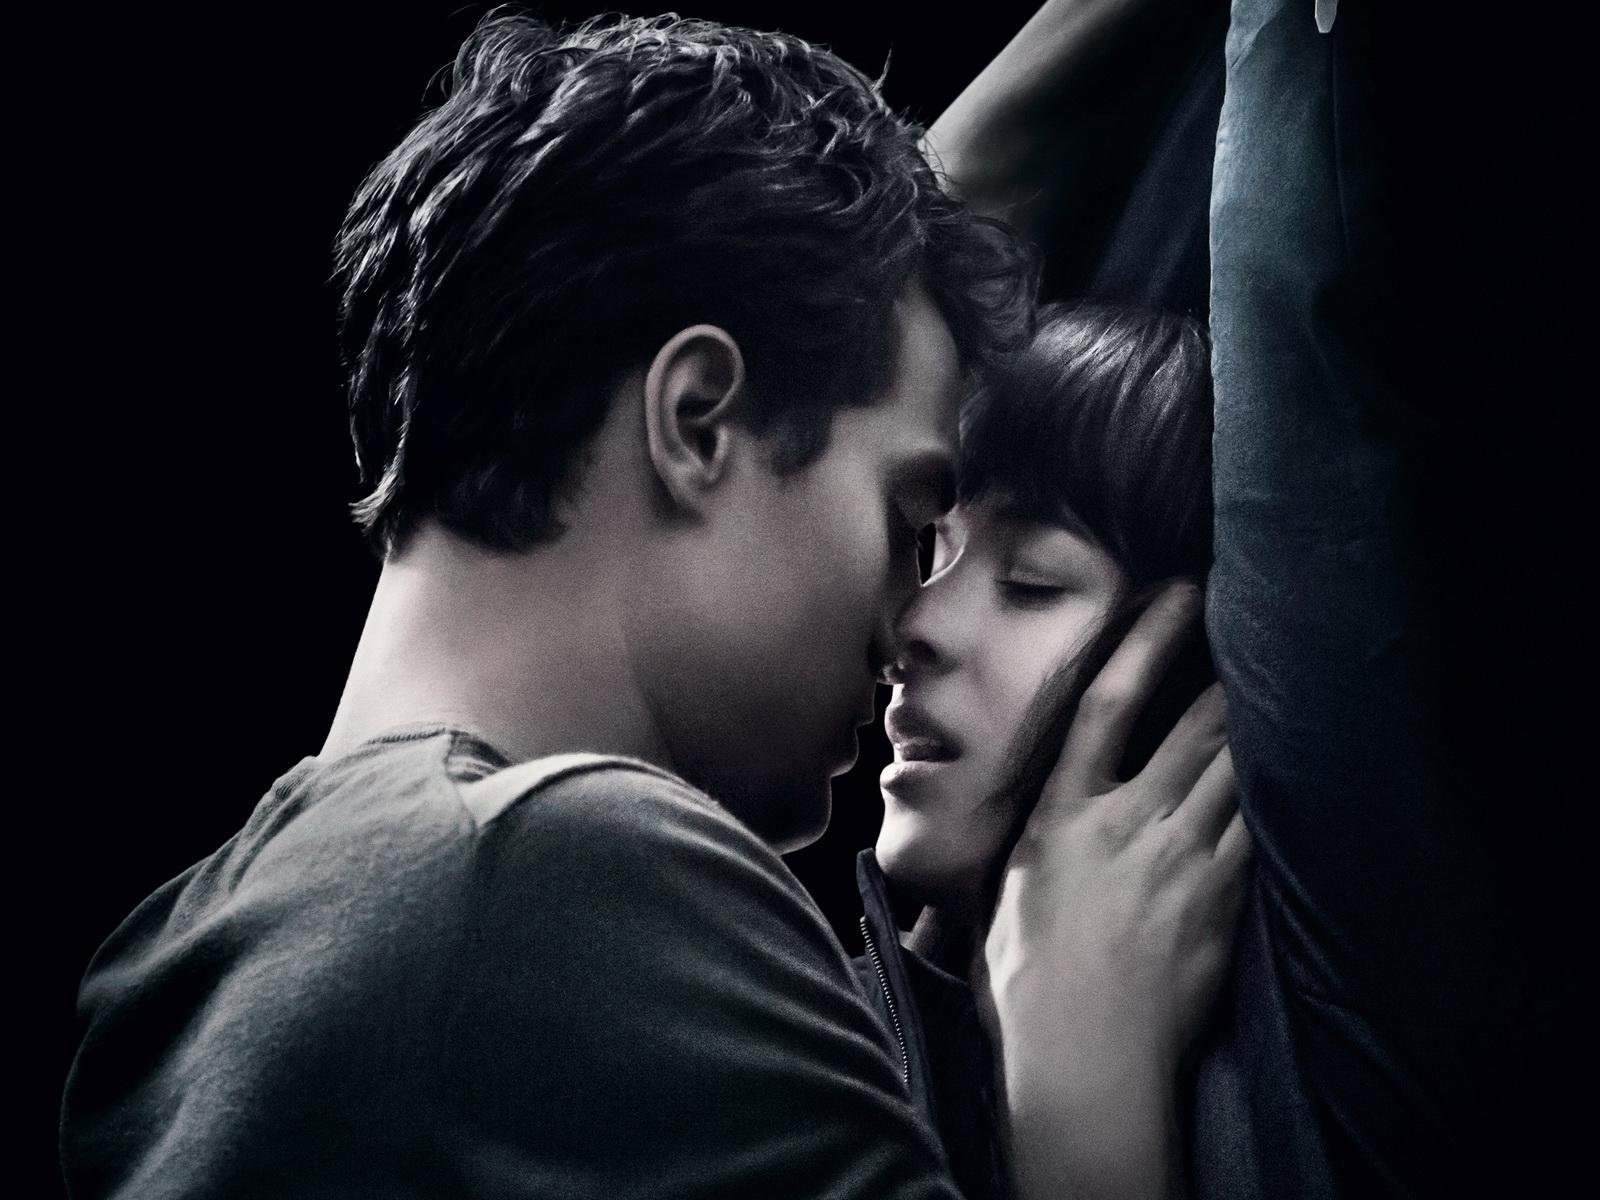 fifty shades of grey movie full movie free download